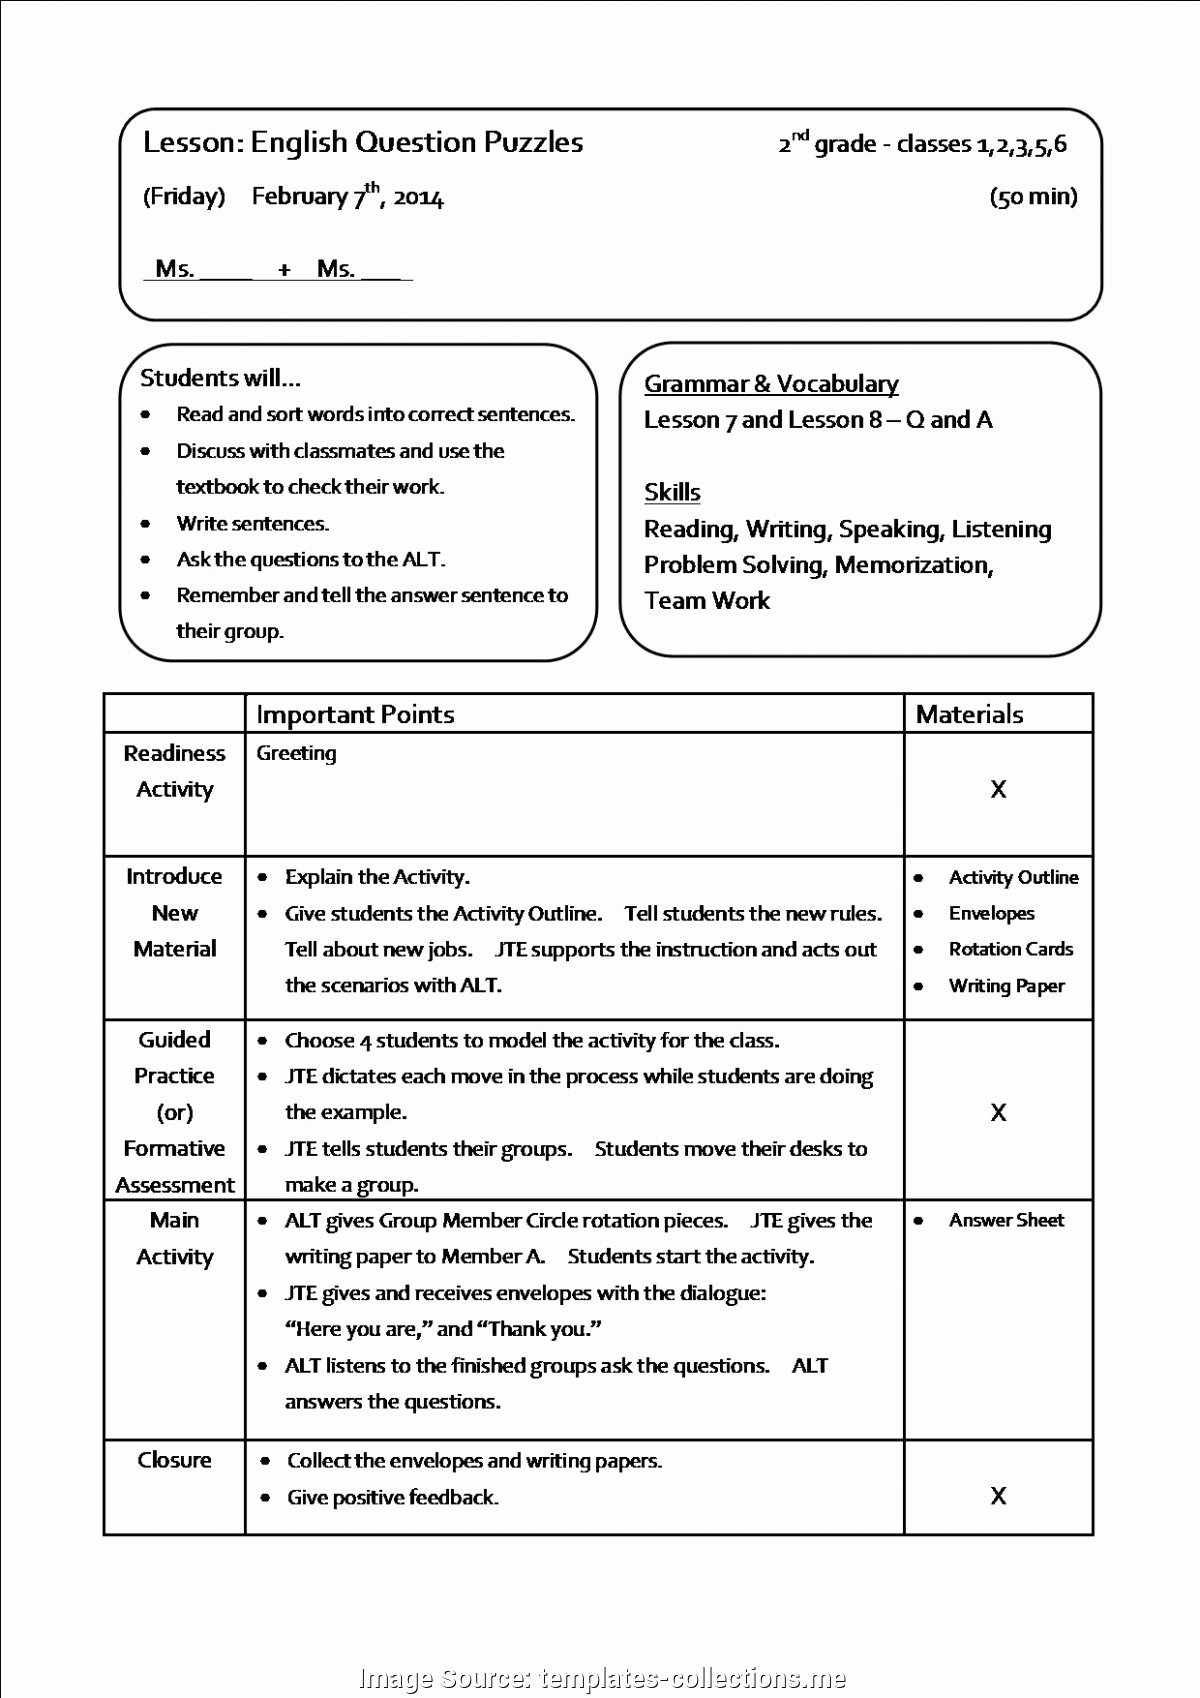 Elementary School Lesson Plans Template Lovely Fresh Elementary English Lesson Plans Lesson Plan Template